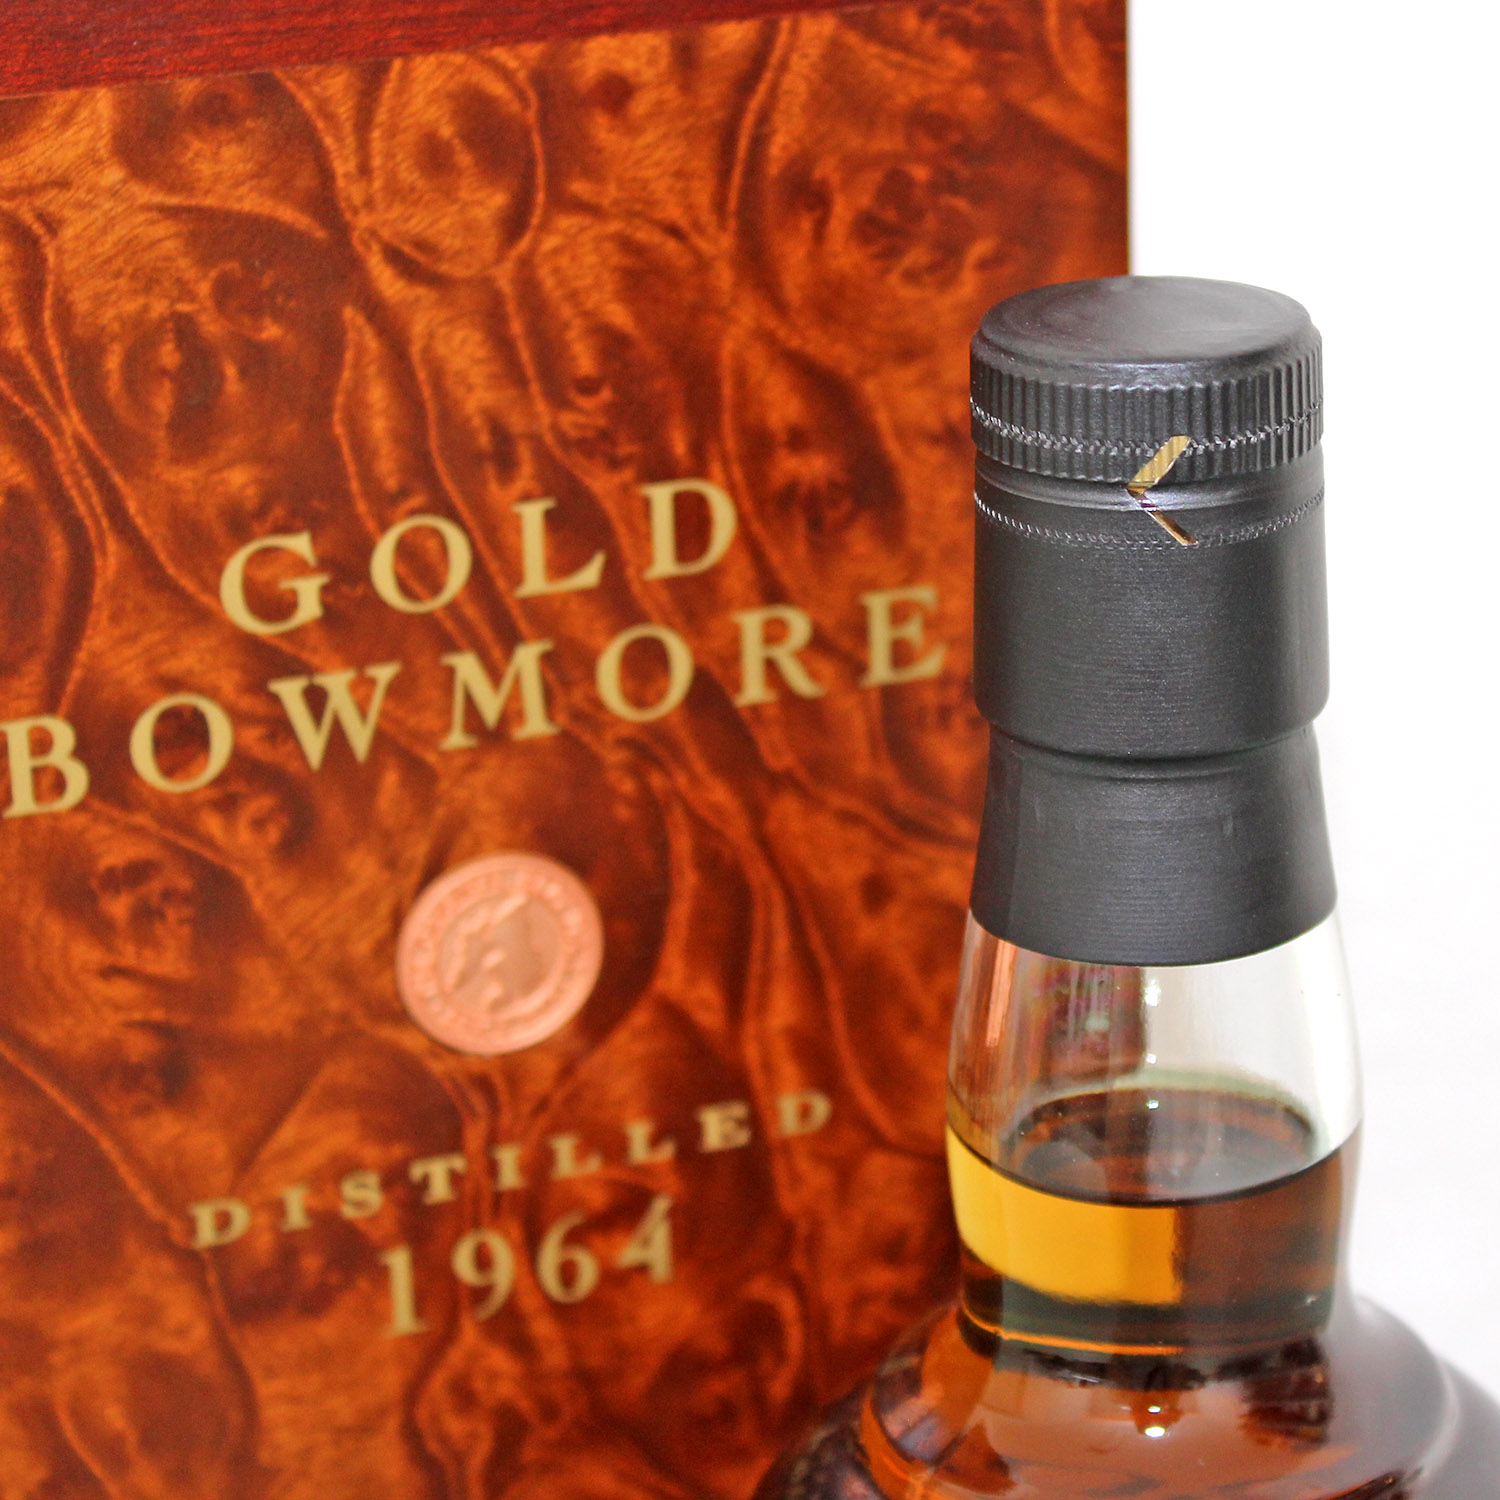 Gold Bowmore 1964 44 Years The Trilogy Capsule